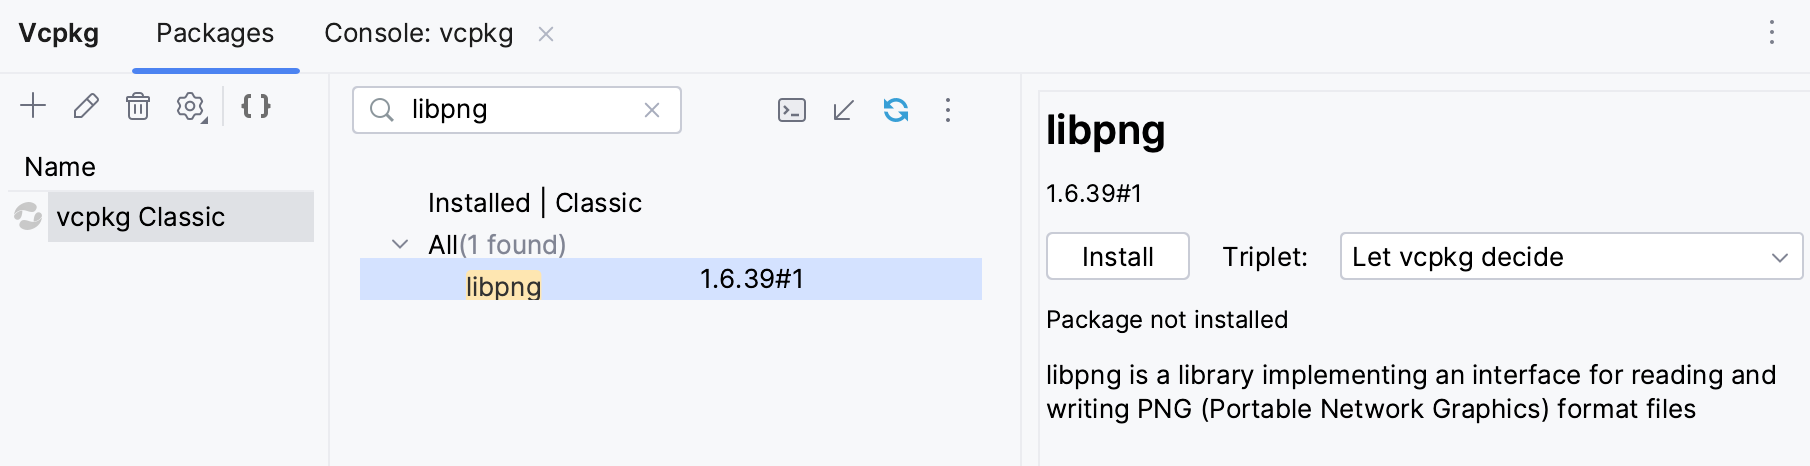 Search for libpng in vcpkg